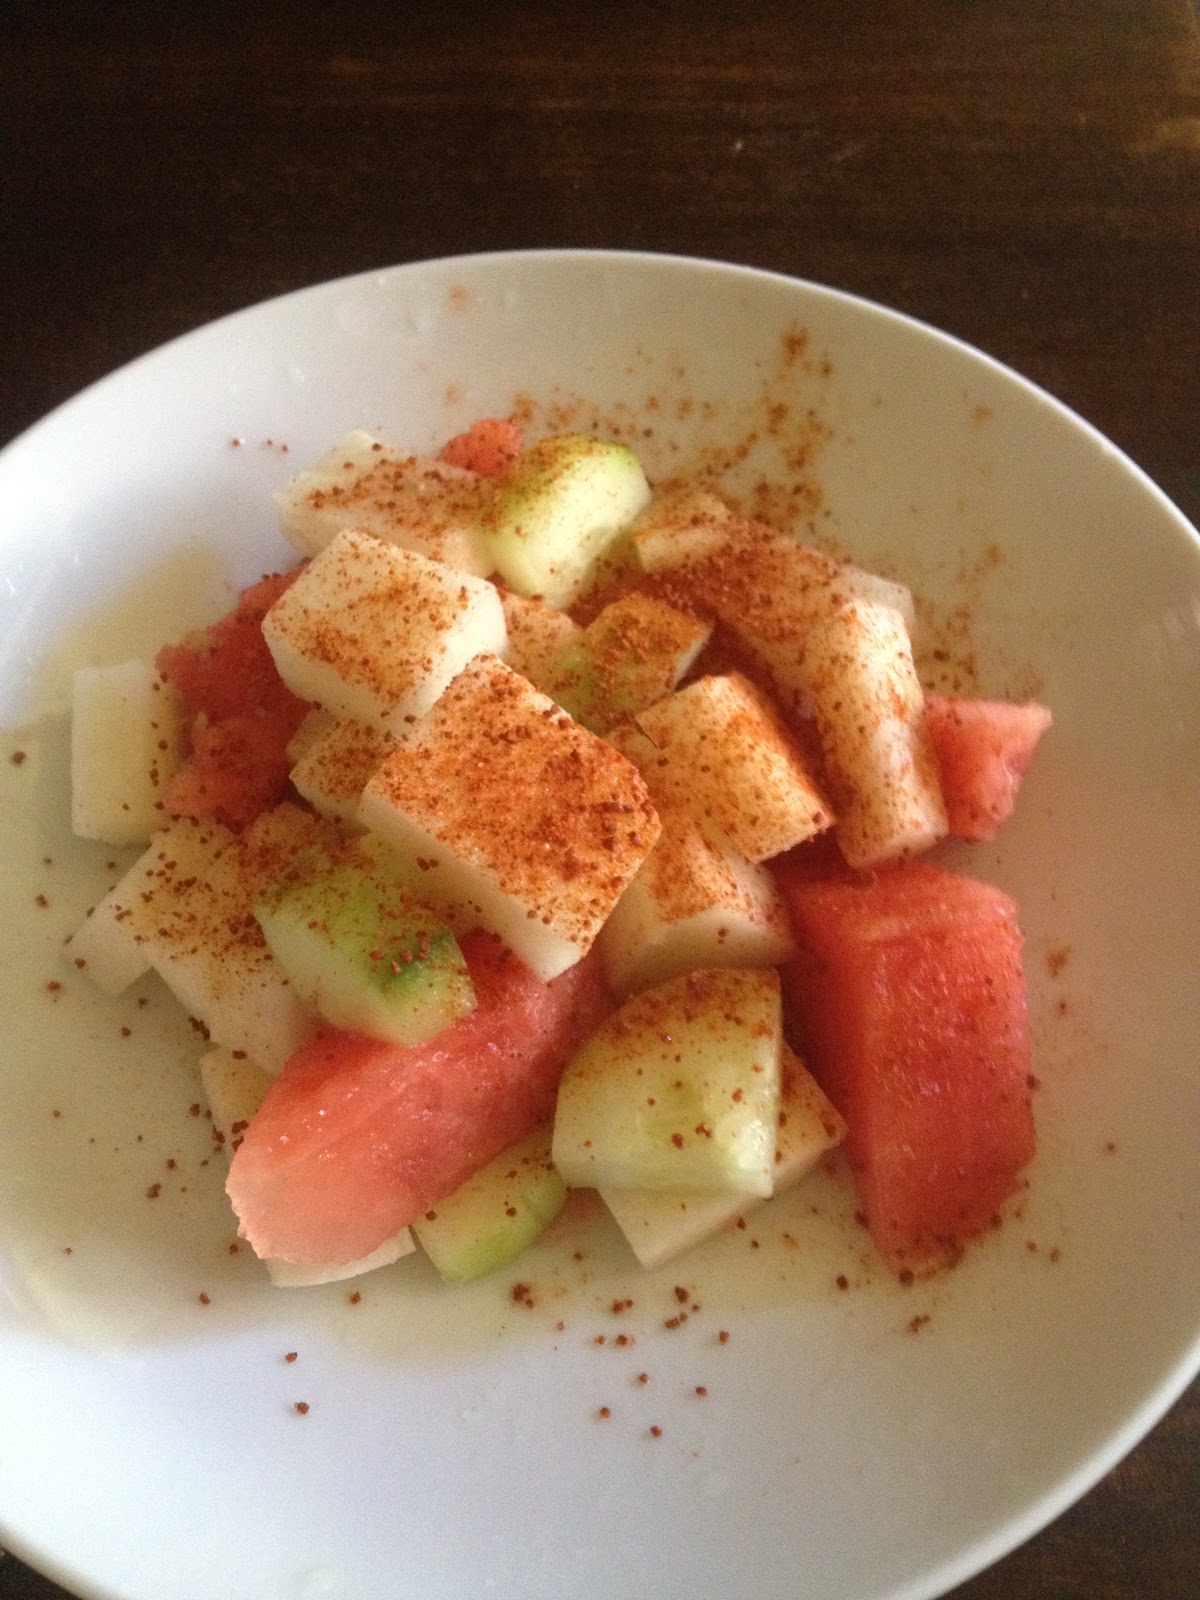 The Paleo Plunge: Spicy Mexican Fruit Salad